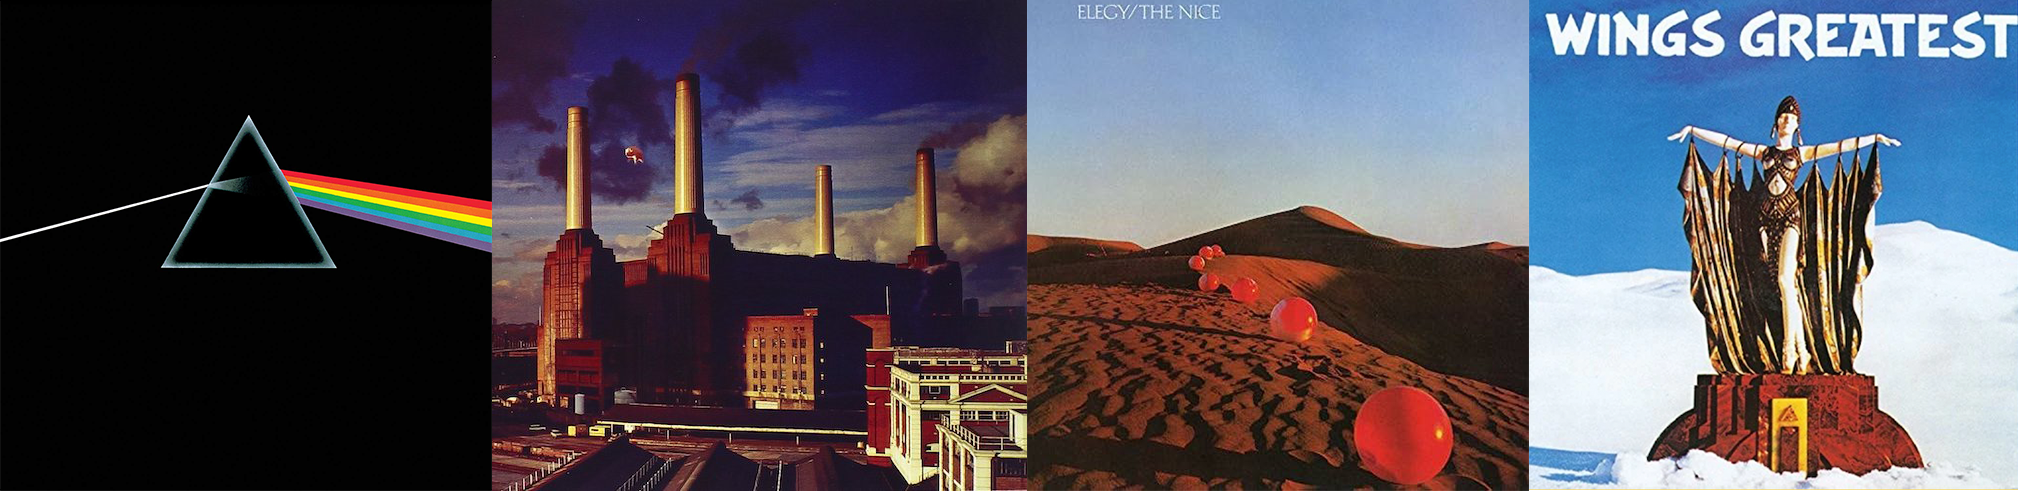 Hipgnosis covers for Pink Floyd's Dark Side of the Moon & Animals; Elegy's The Nice; and Wing's Greatest